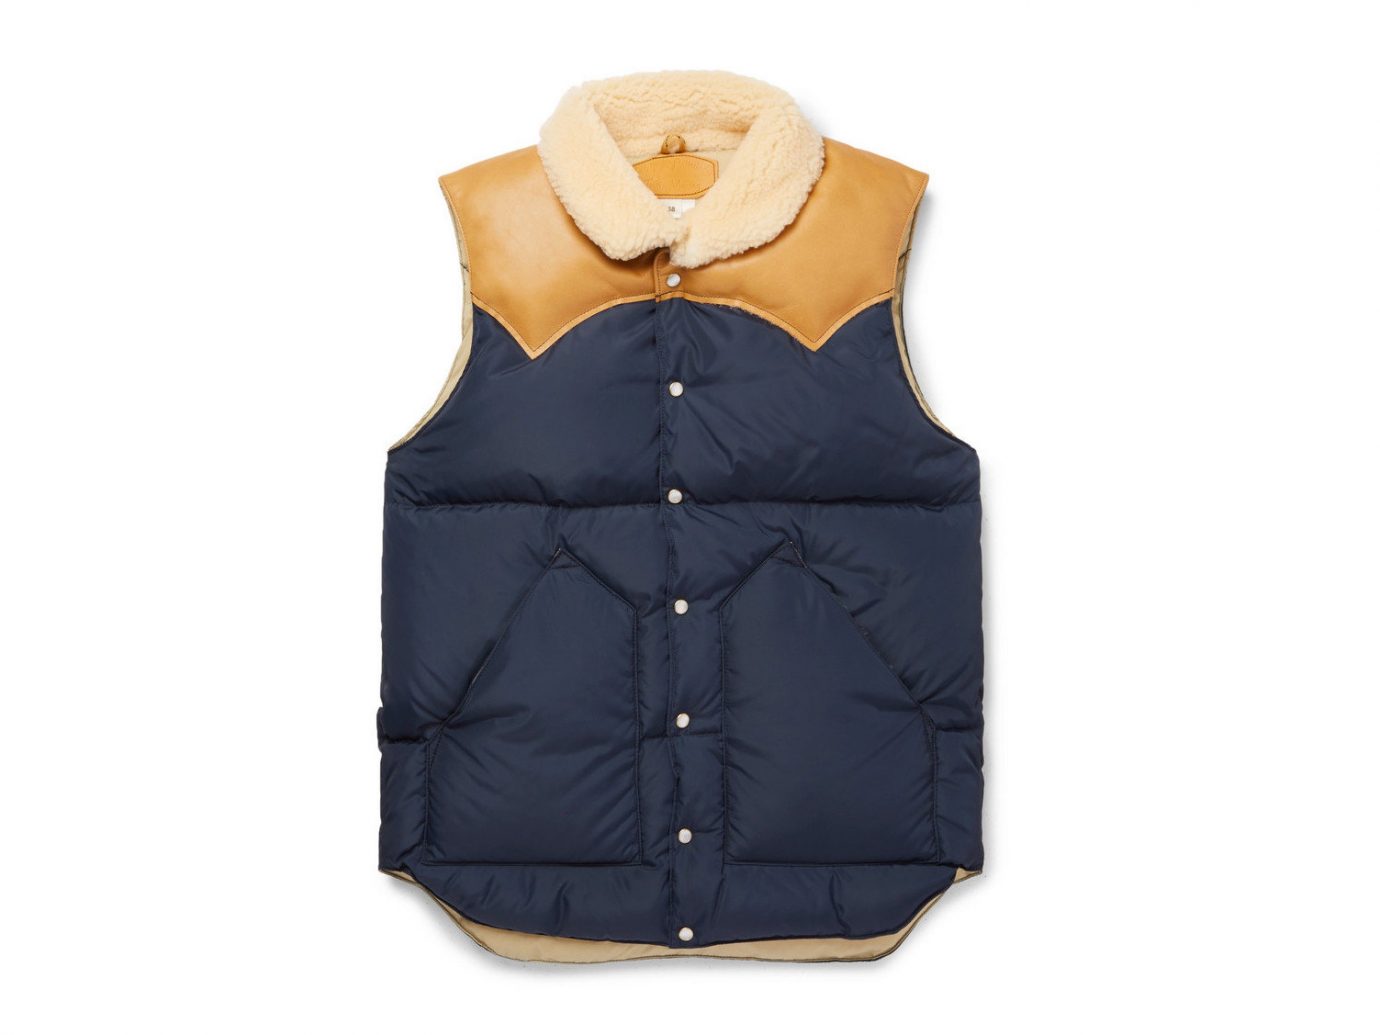 Style + Design Travel Shop clothing vest outerwear product